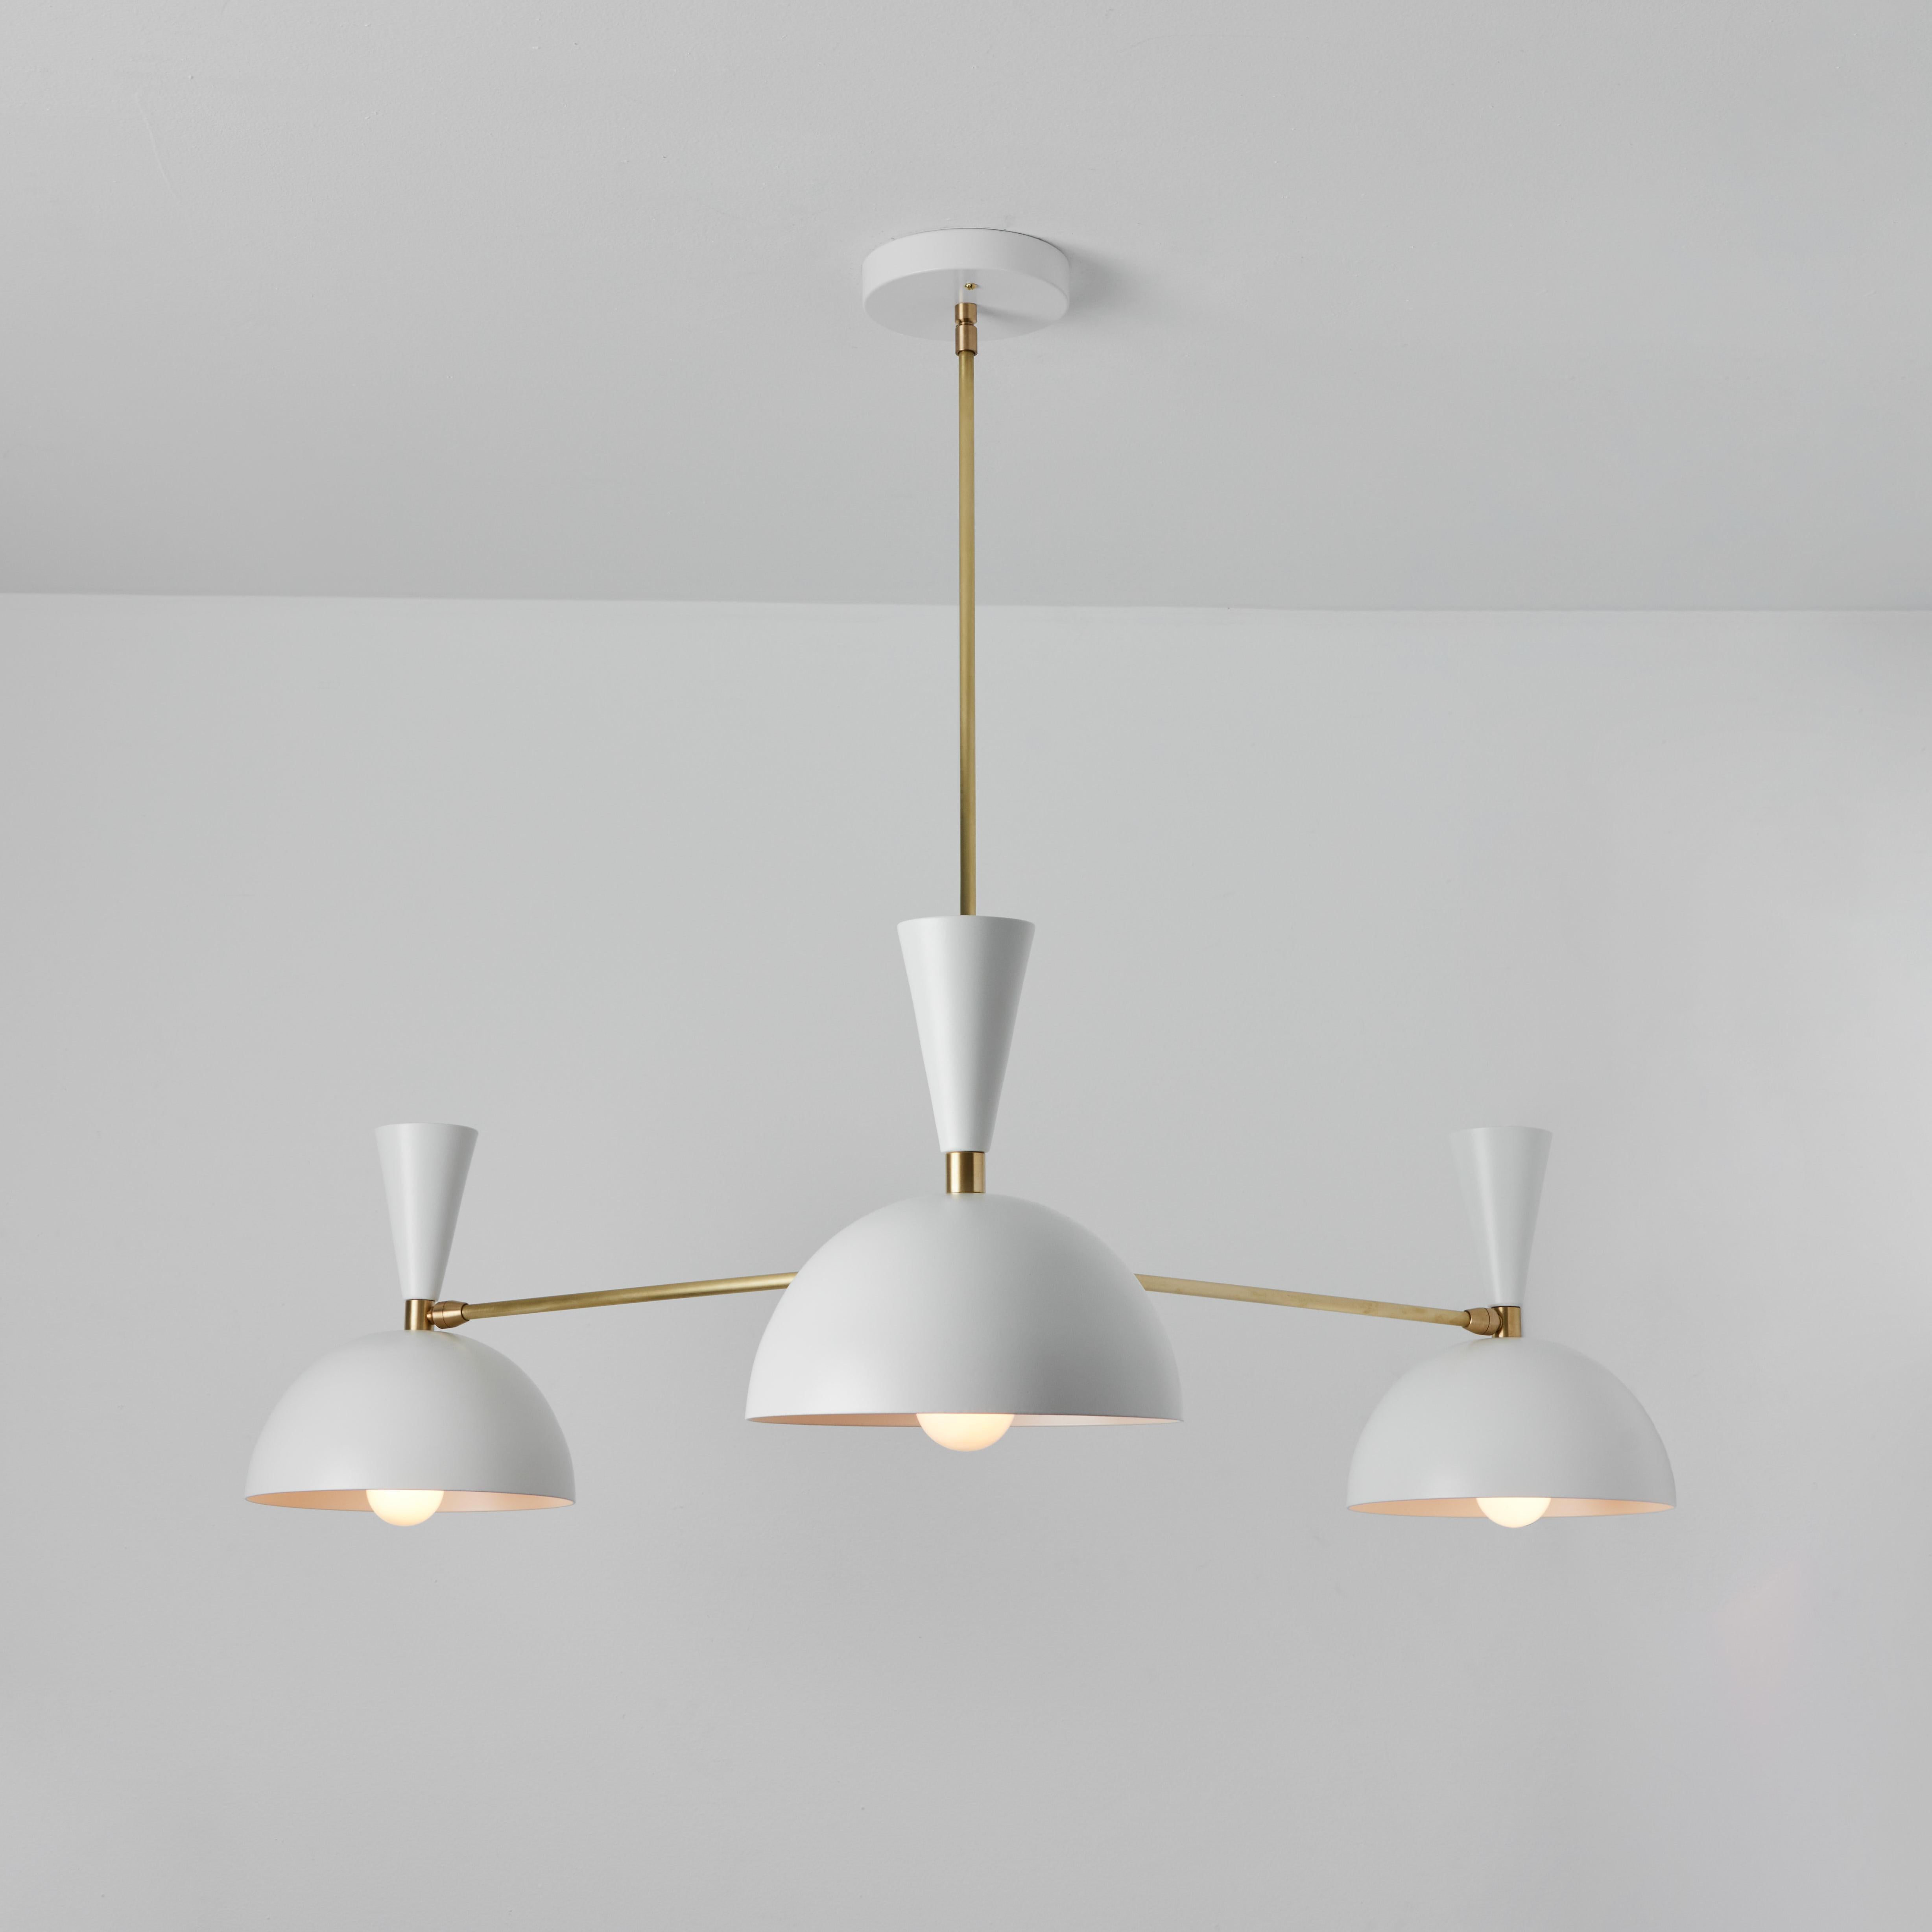 Large Three-Cone 'Lola II' chandelier in white and brass. 

Hand-fabricated by Los Angeles based designer and lighting professional Alvaro Benitez, this highly refined chandelier is reminiscent of the iconic midcentury Italian designs of Arteluce